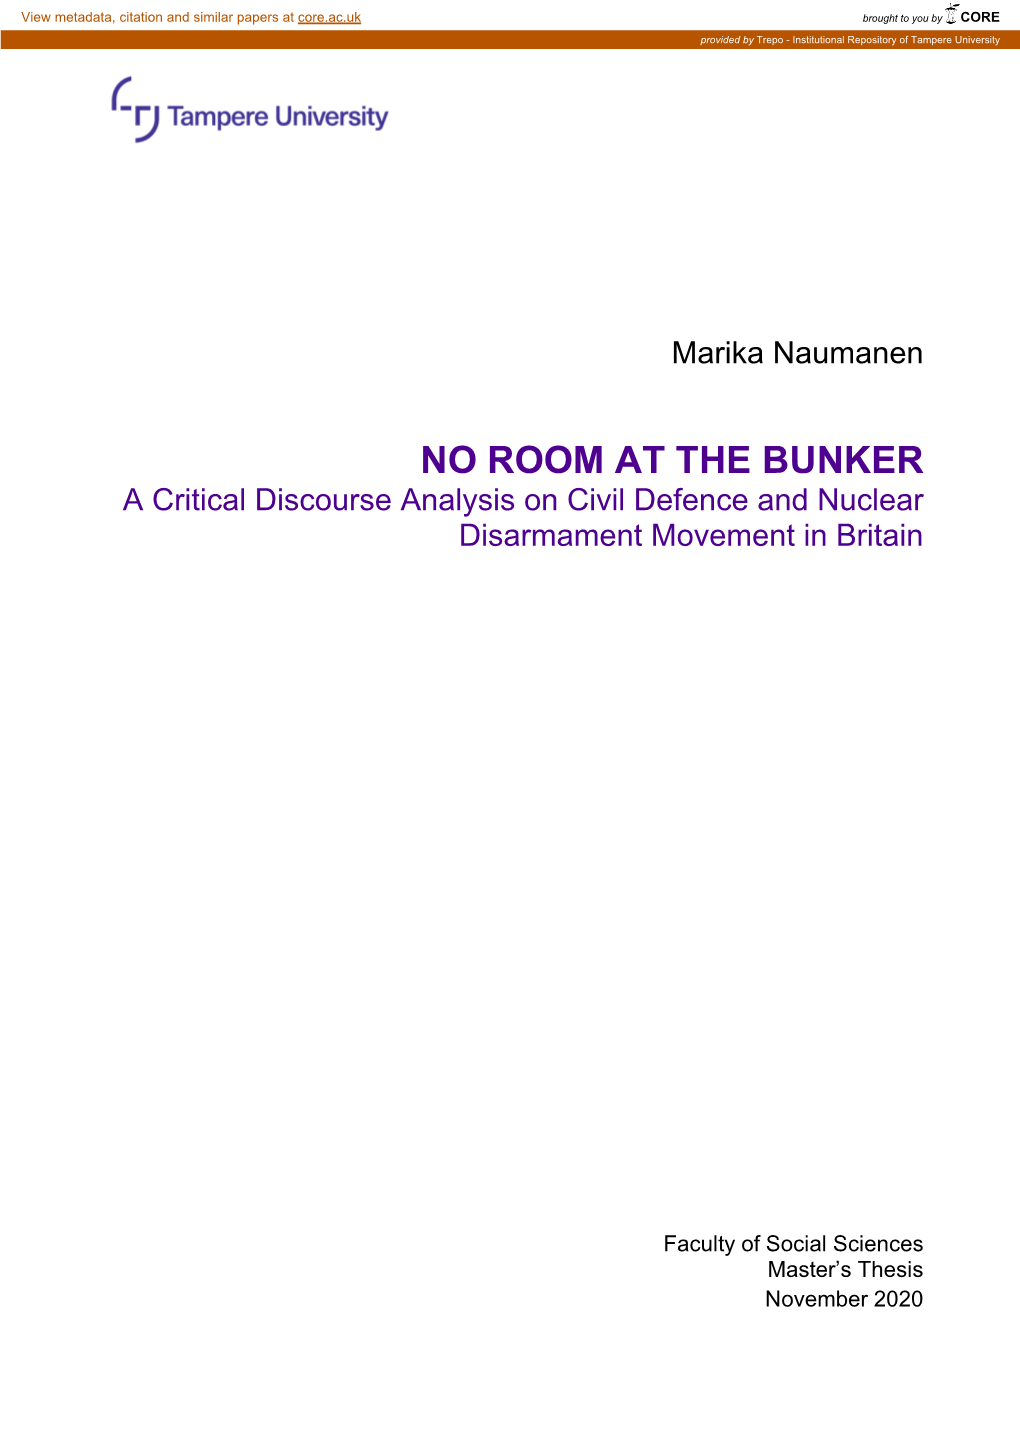 NO ROOM at the BUNKER a Critical Discourse Analysis on Civil Defence and Nuclear Disarmament Movement in Britain